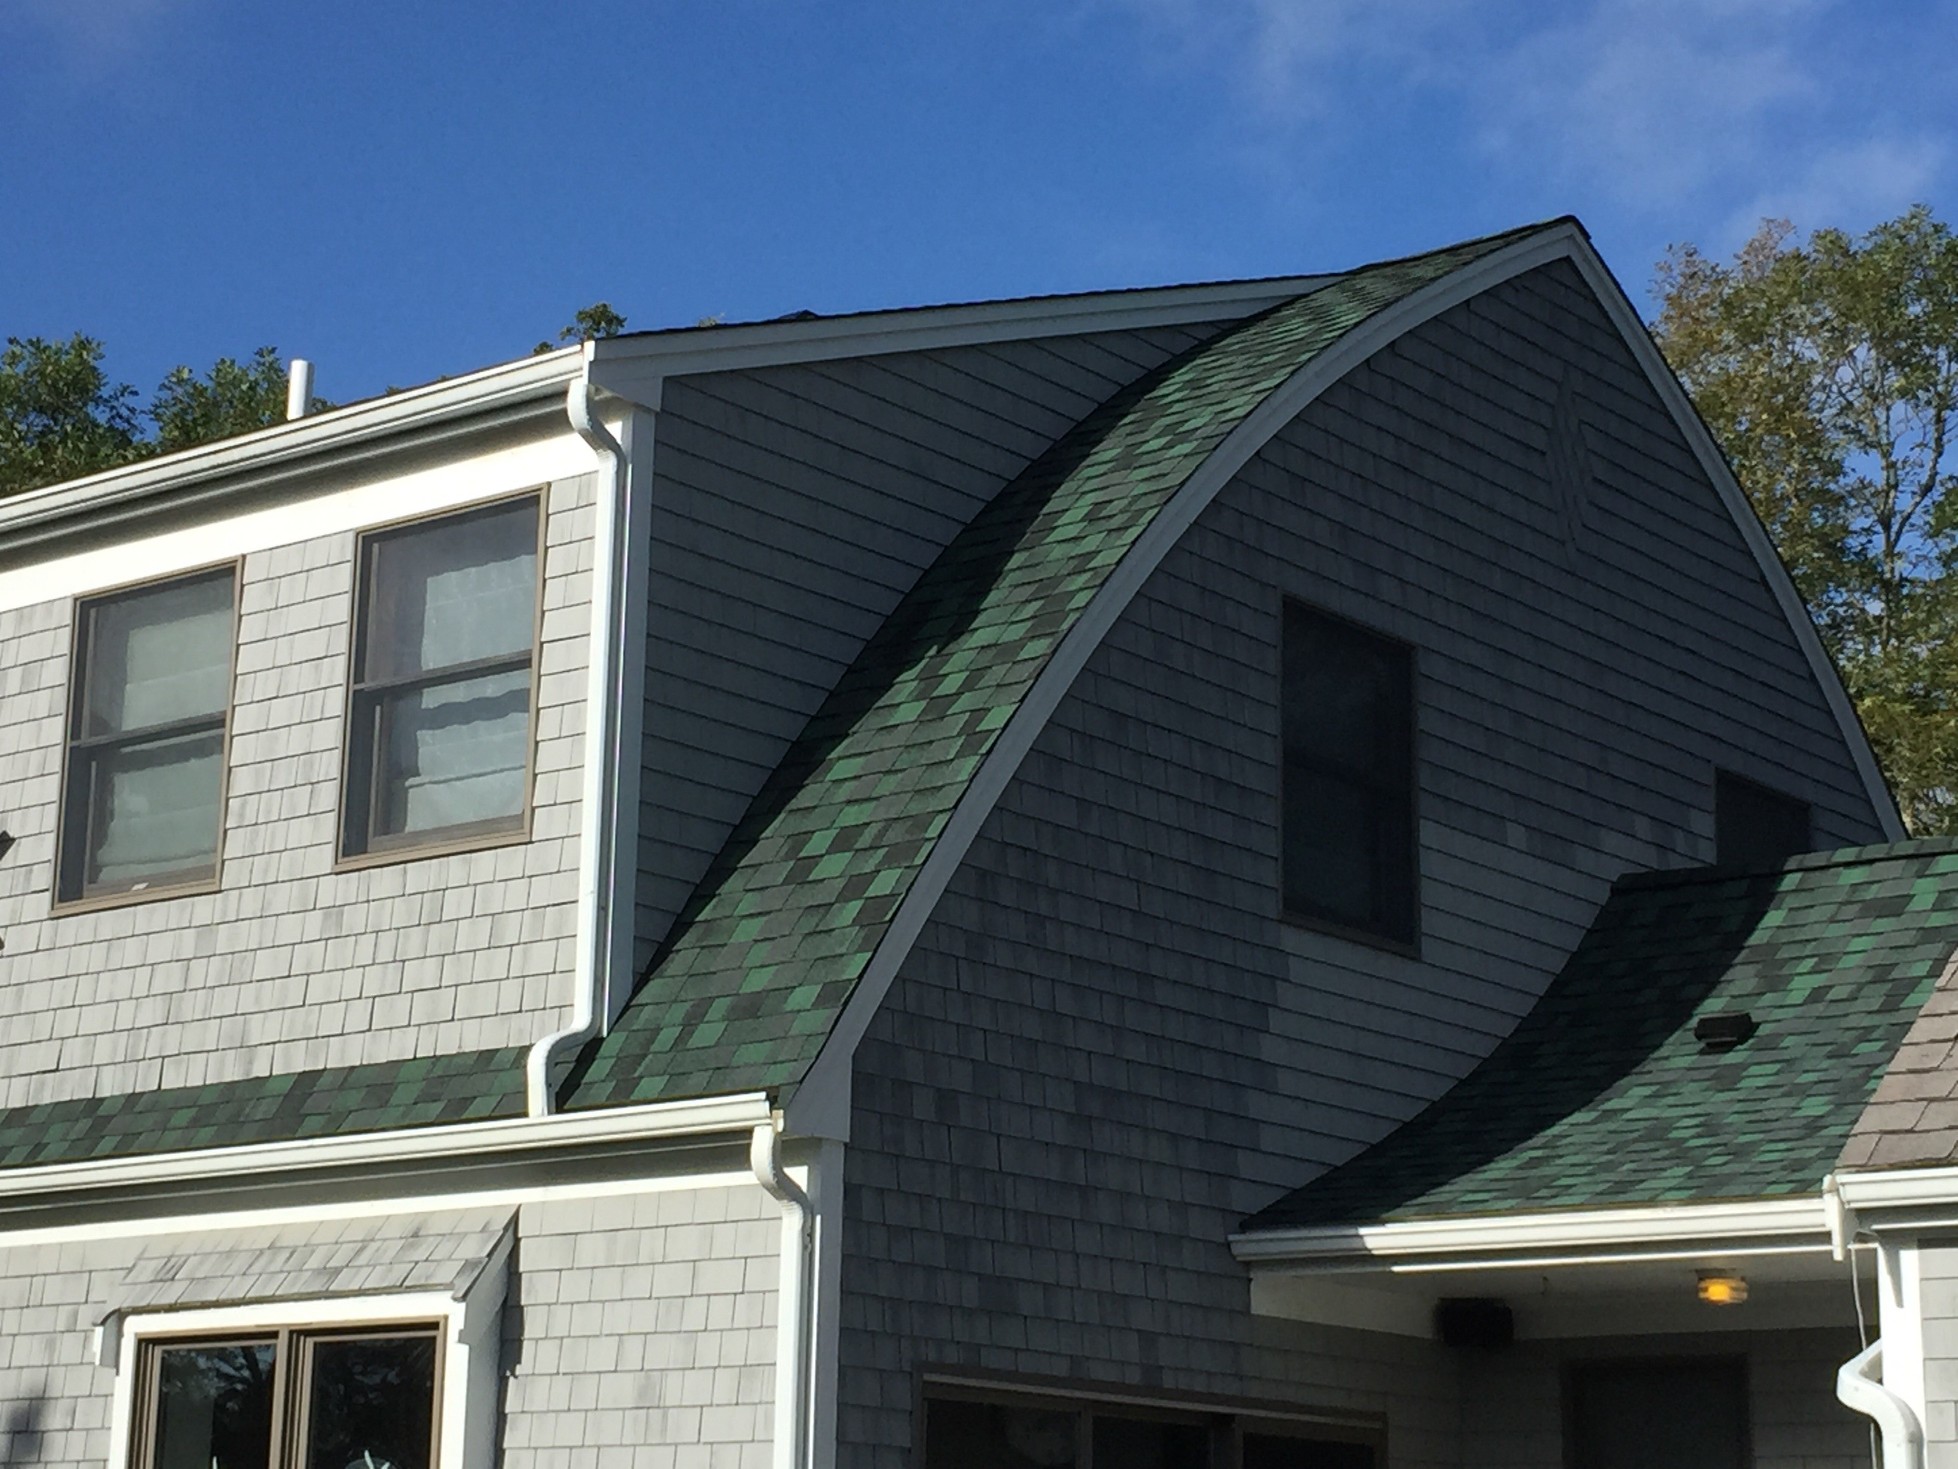 Falmouth roofing and siding